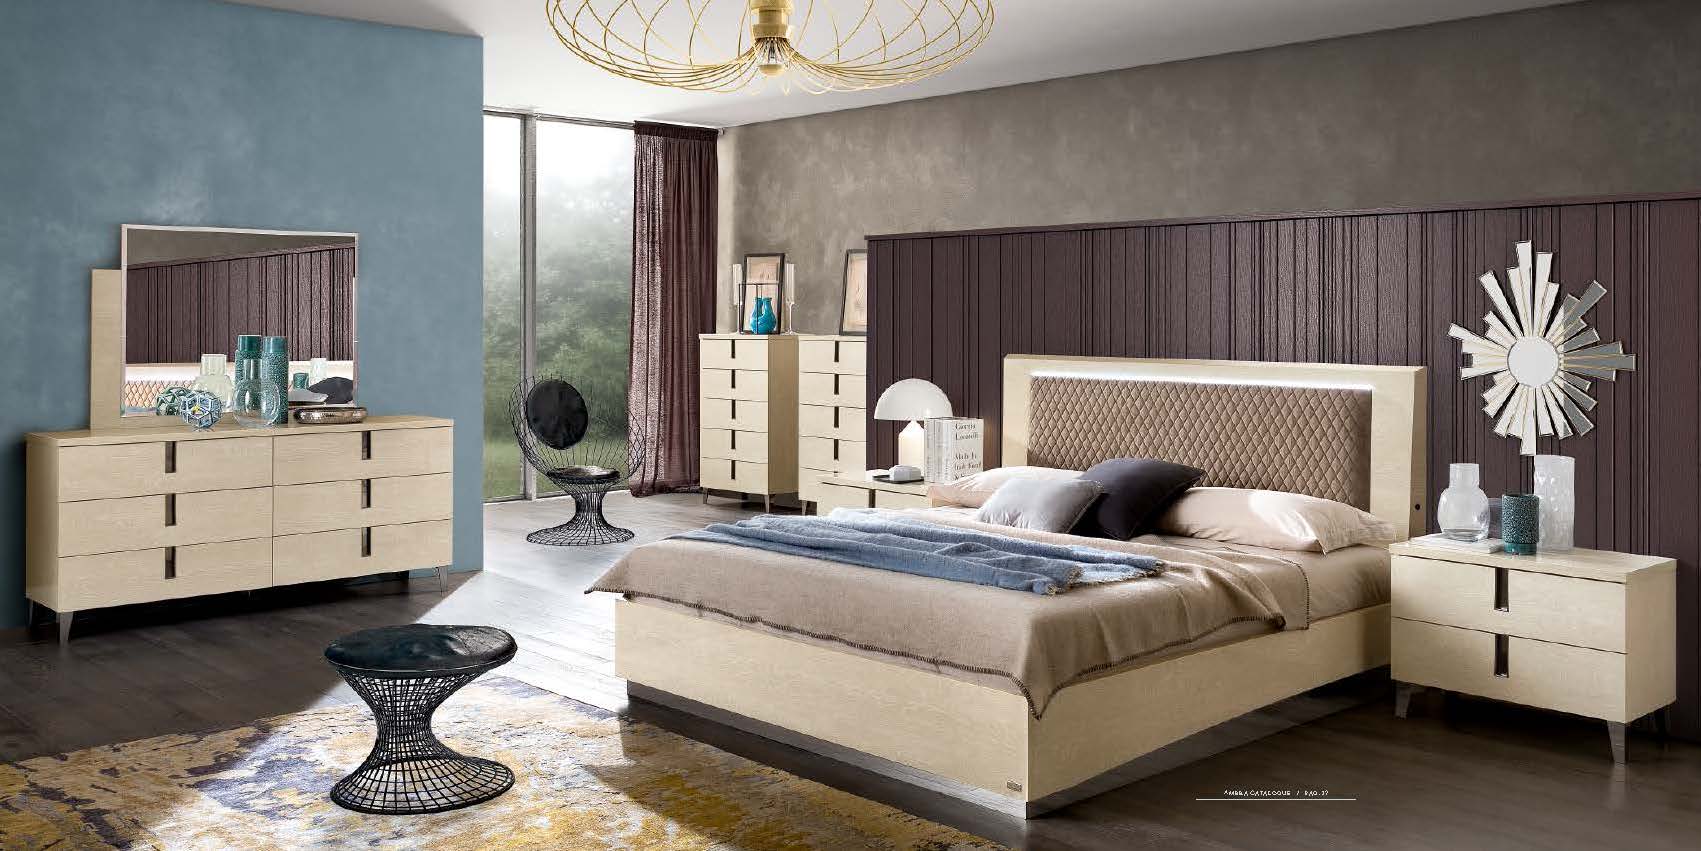 Bedroom Furniture Mirrors Ambra Bedroom Additional Items